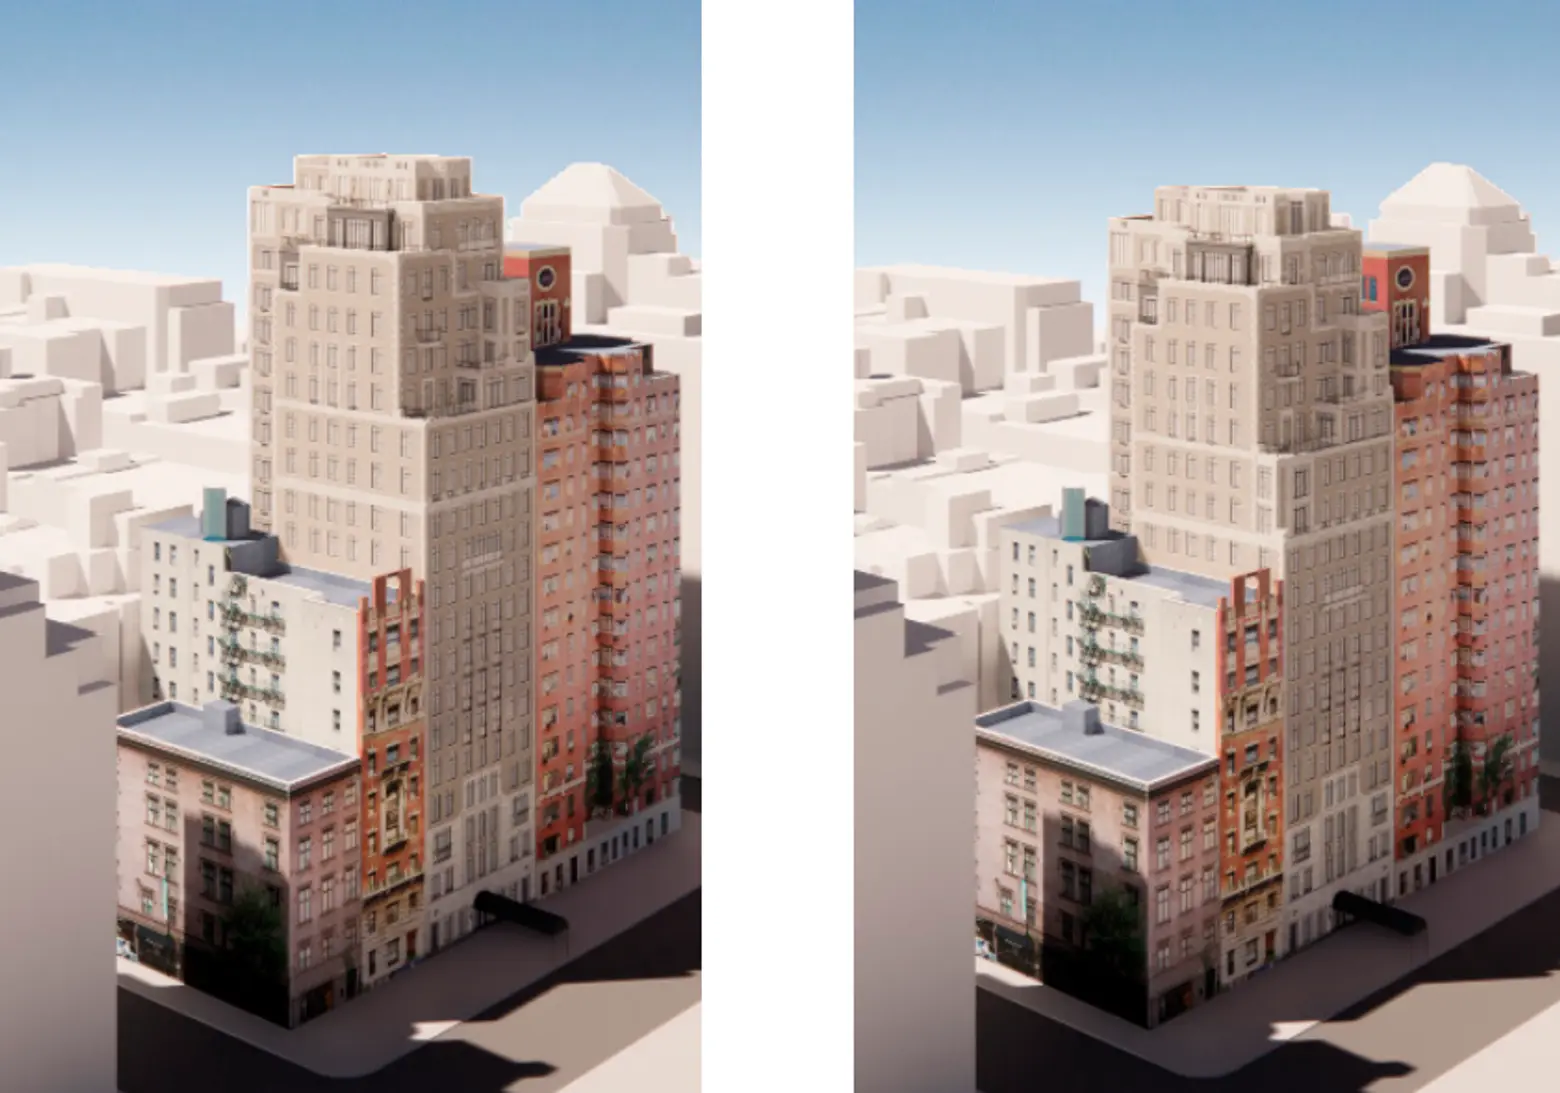 170-year-old Greenwich Village buildings will be razed and replaced with high-rise condo tower